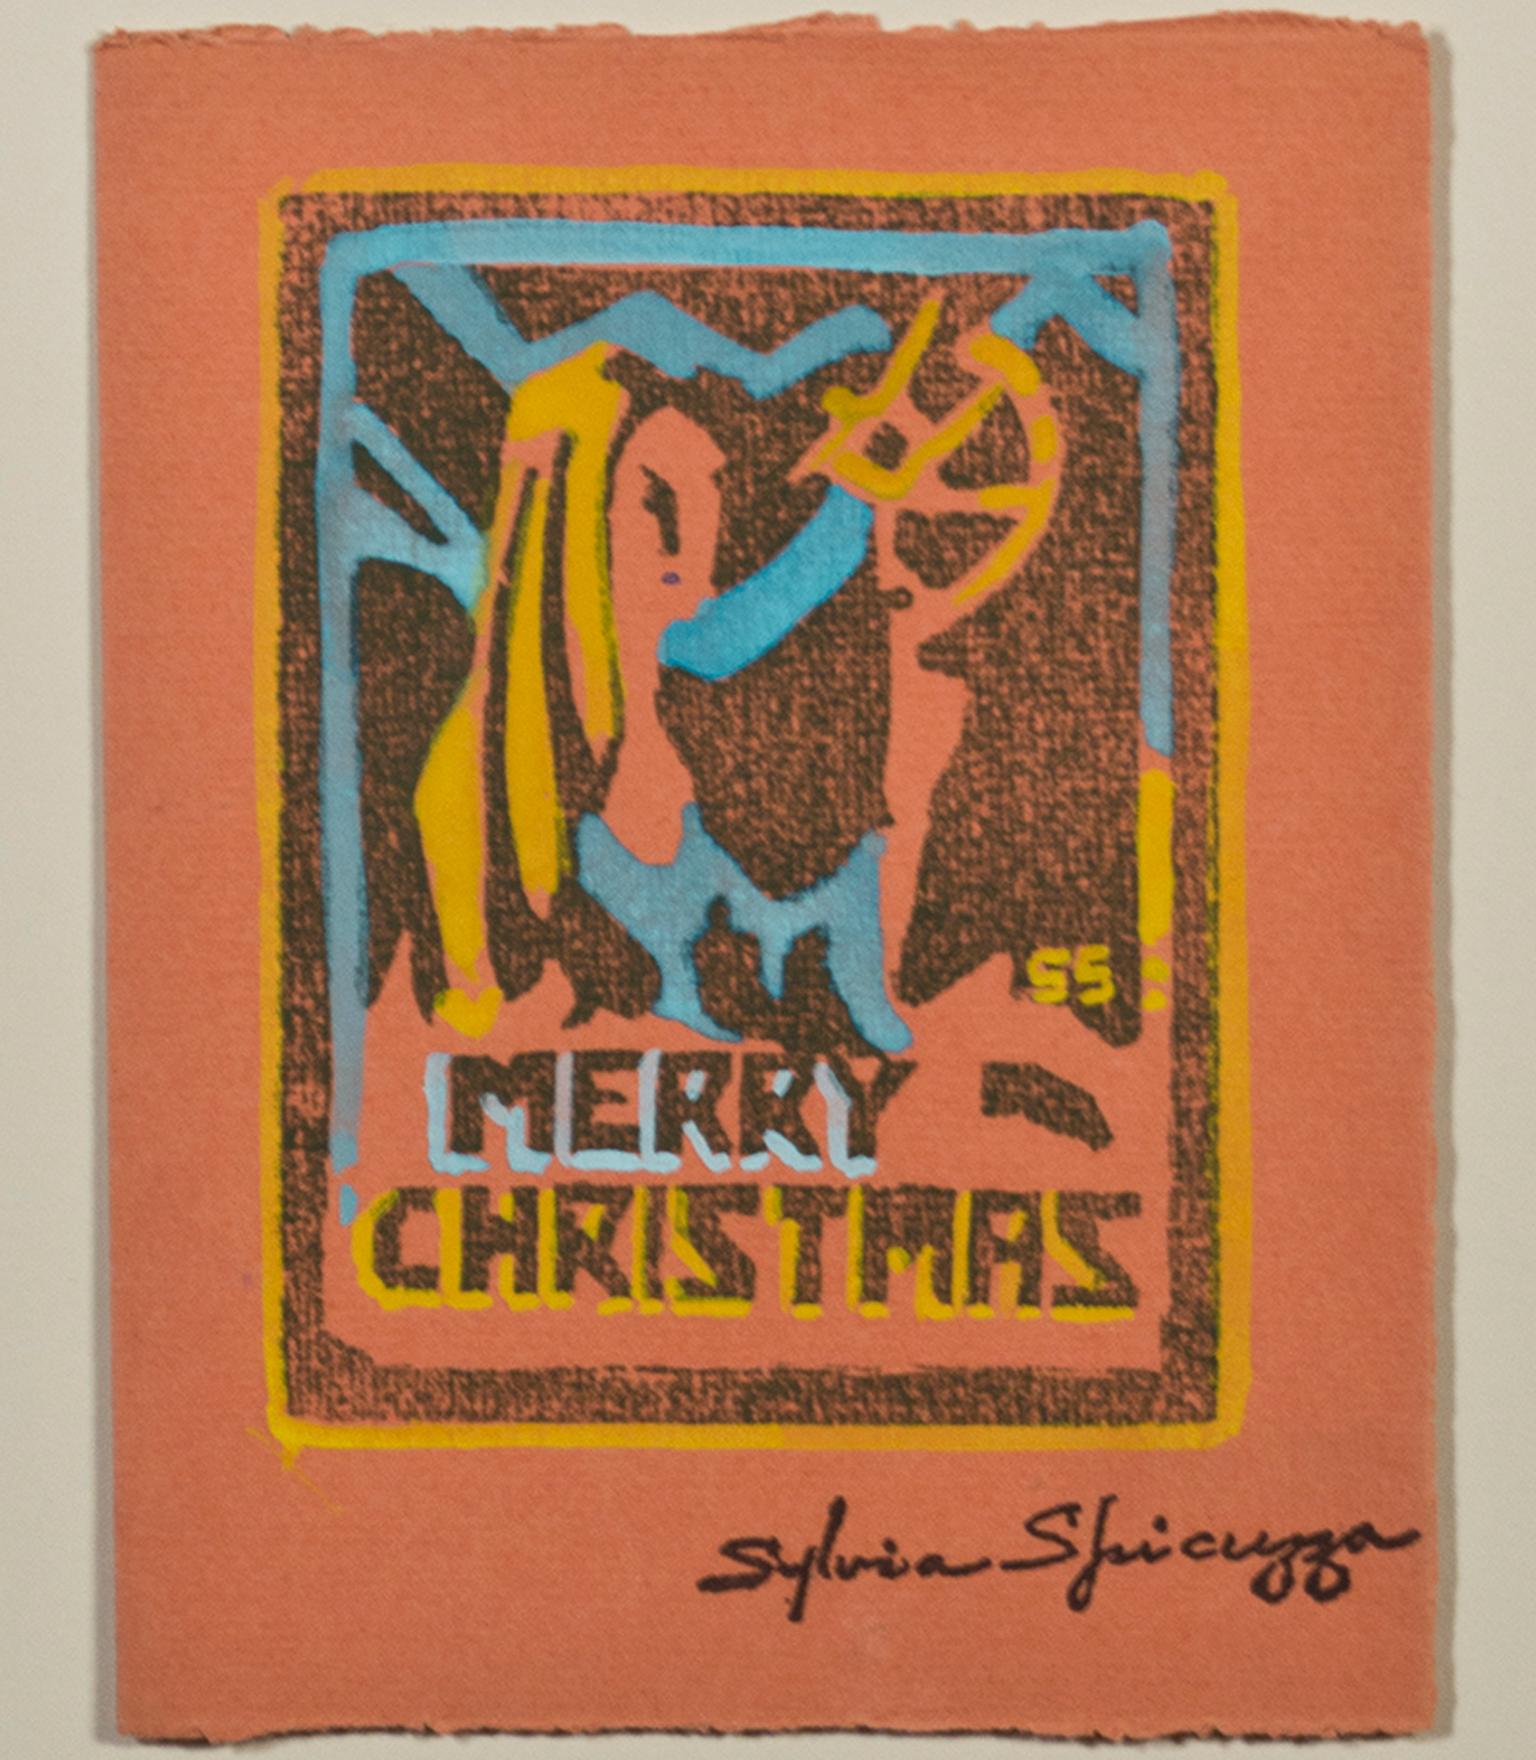 "Merry Christmas" is an original color woodcut on paper by Sylvia Spicuzza.  The artist stamped her signature lower right. This artwork features the  an abstracted figure on orange paper with yellow and blue accents. 

5 1/2" x 4" art
11" x 9 1/2"